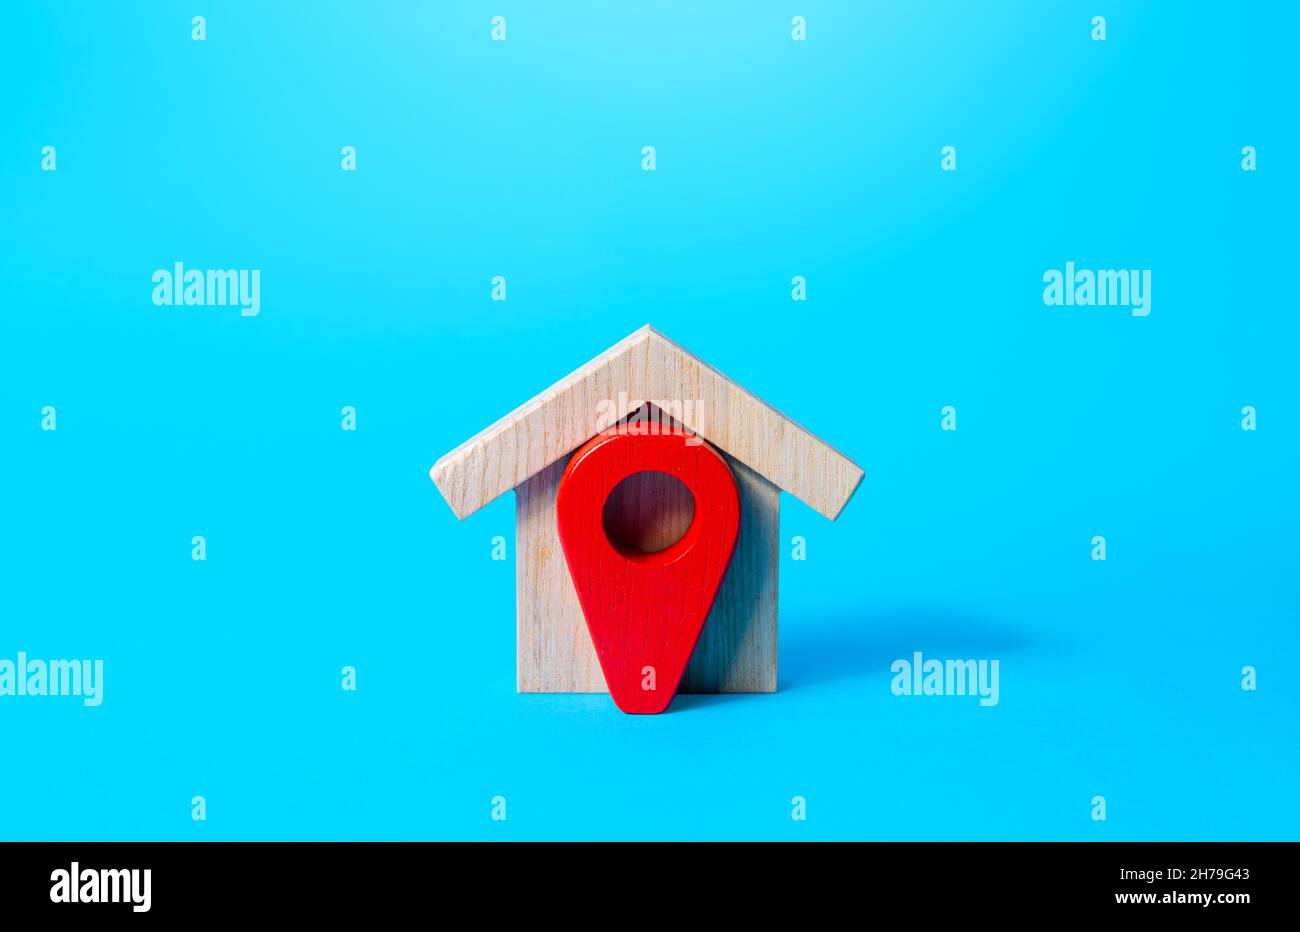 House and red location pin icon. Concept of finding a home to buy or rent. House moving company. Search for housing options. Tracking and navigation. Stock Photo